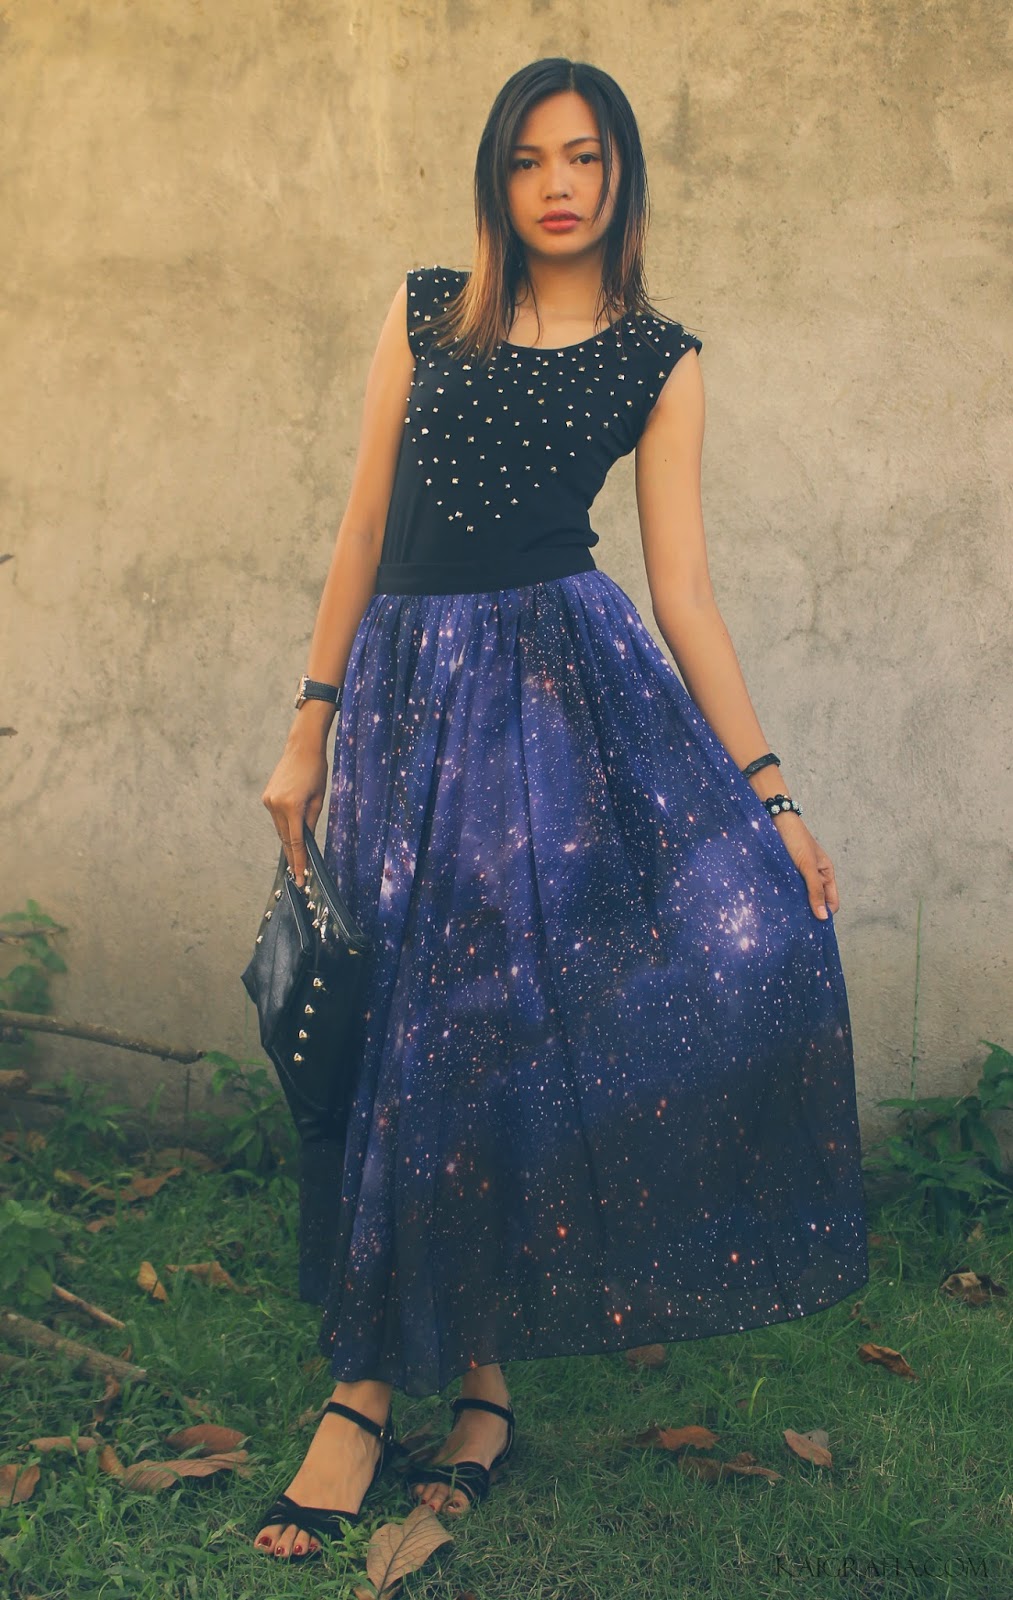 Romwe Galaxy skirt and Top